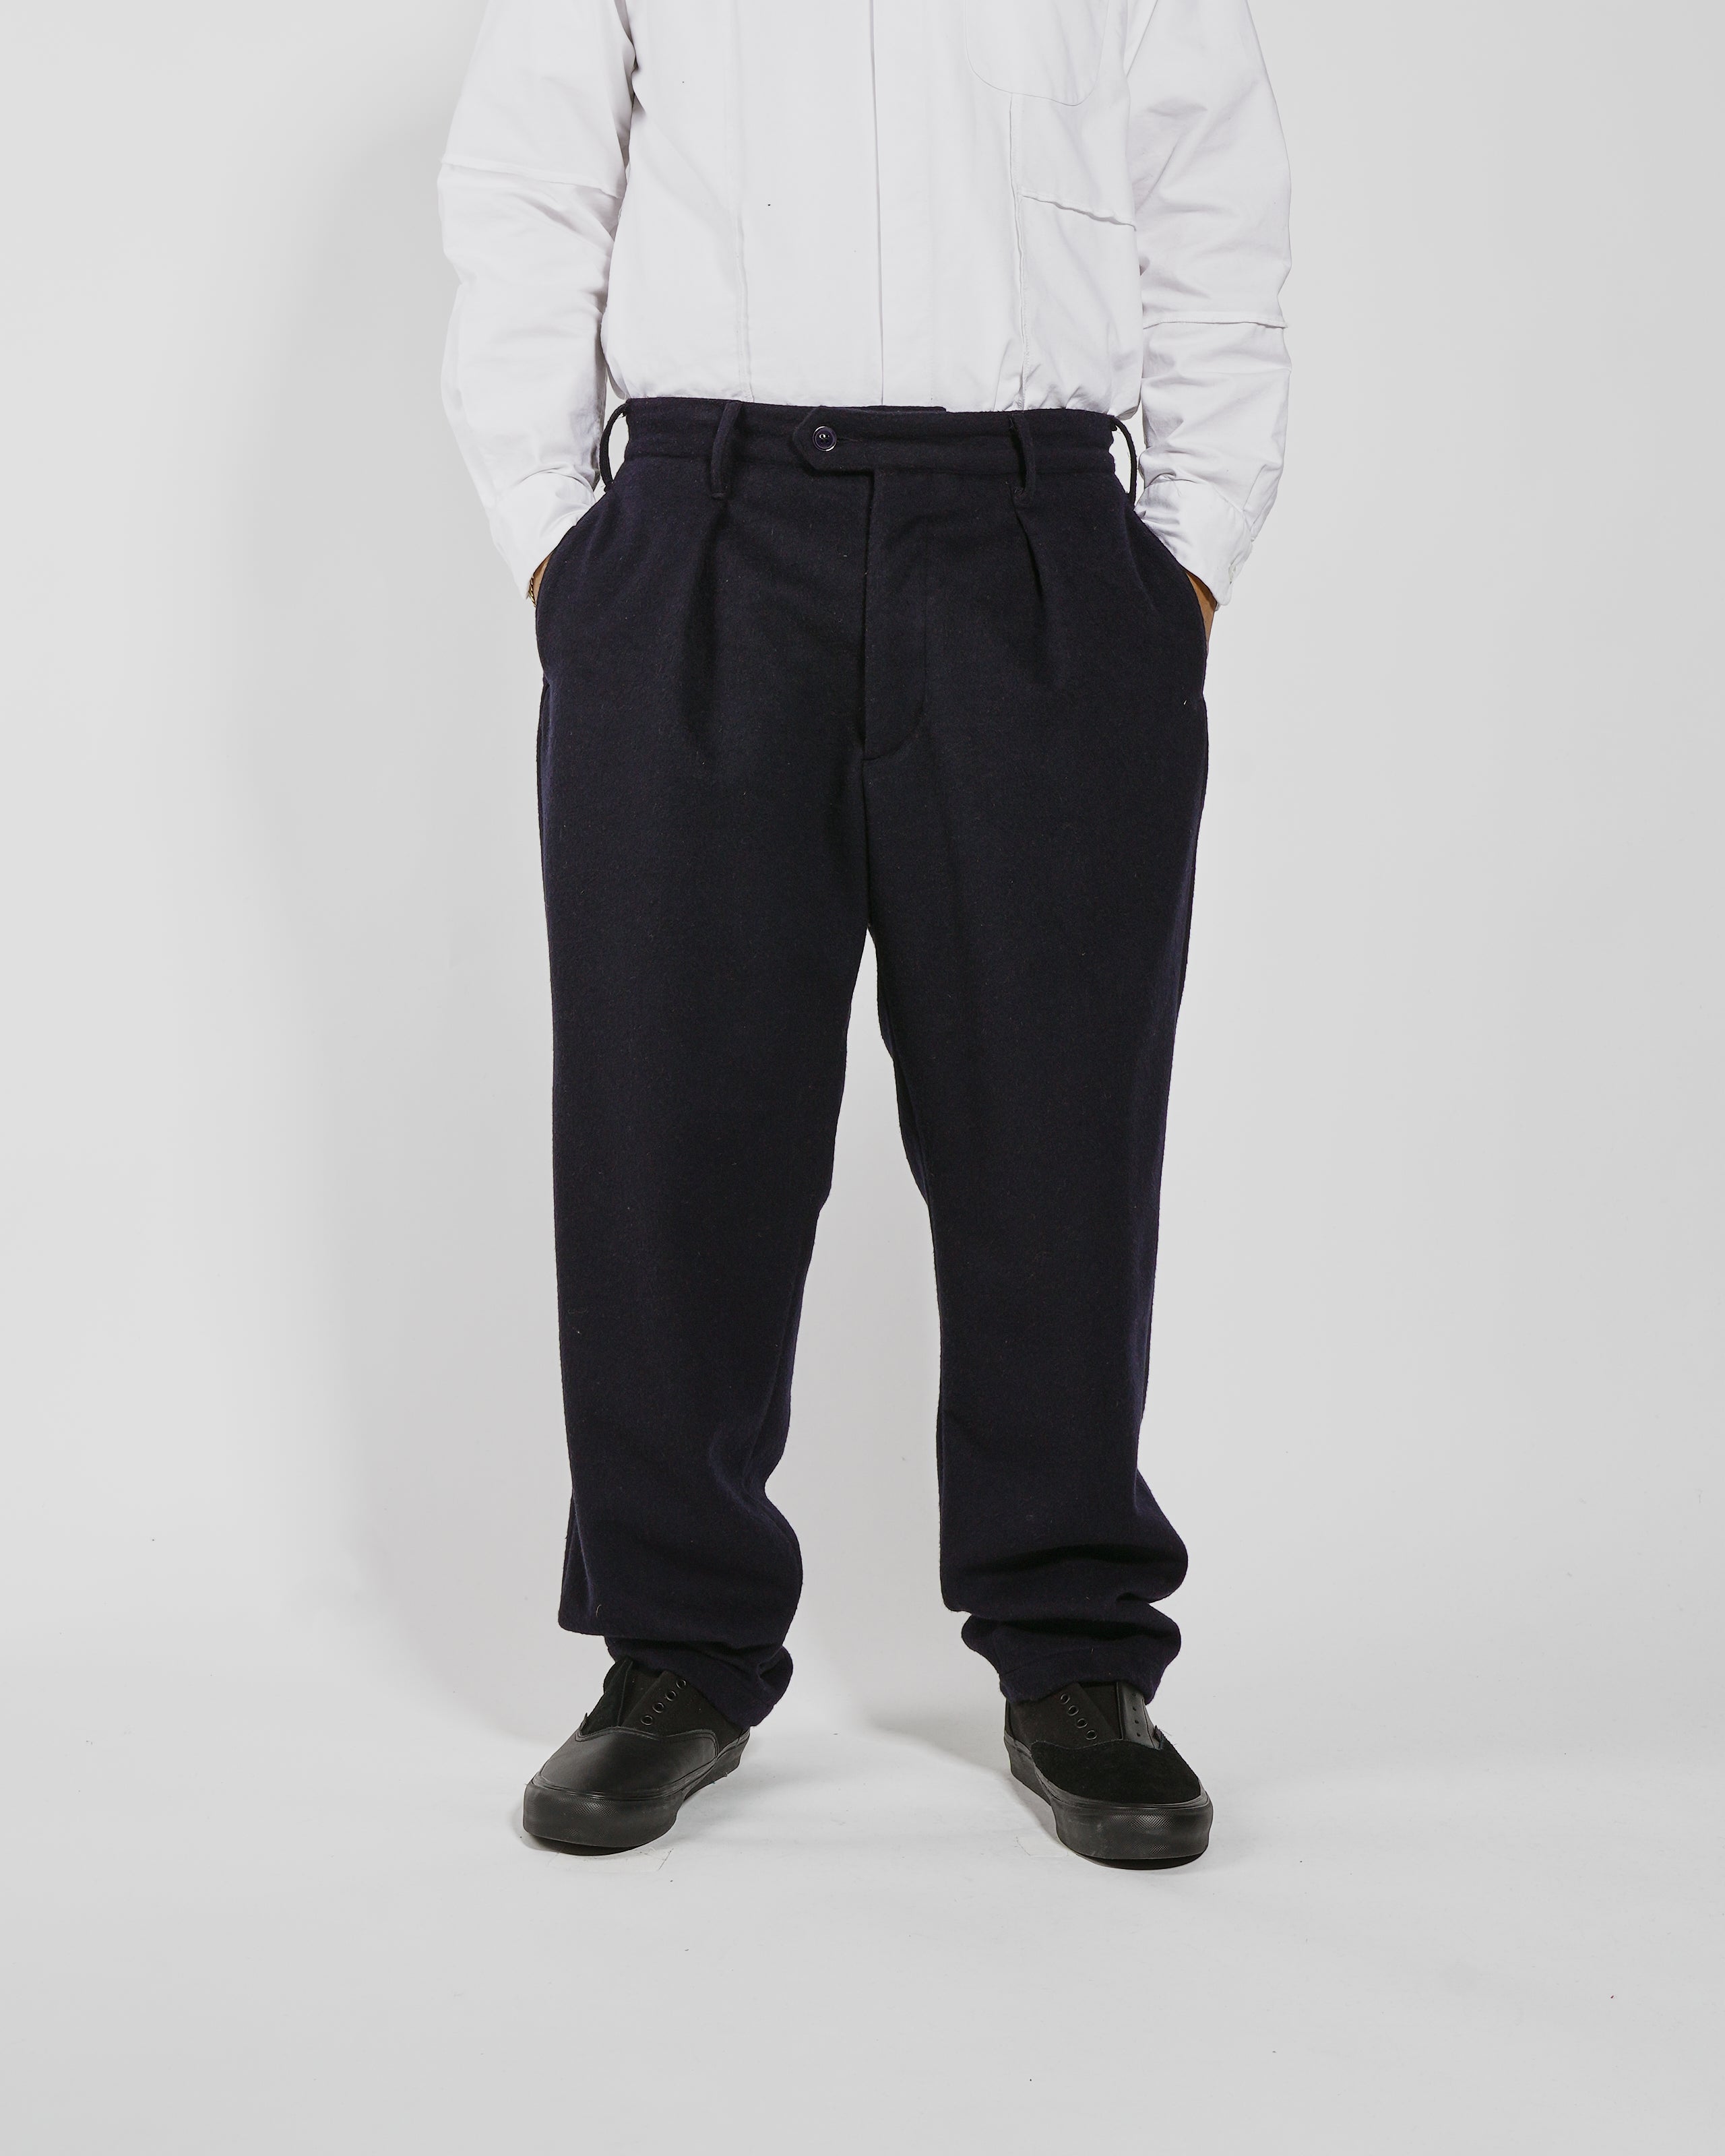 Carlyle Pant - Dk. Navy Wool Polyester Heavy Flannel